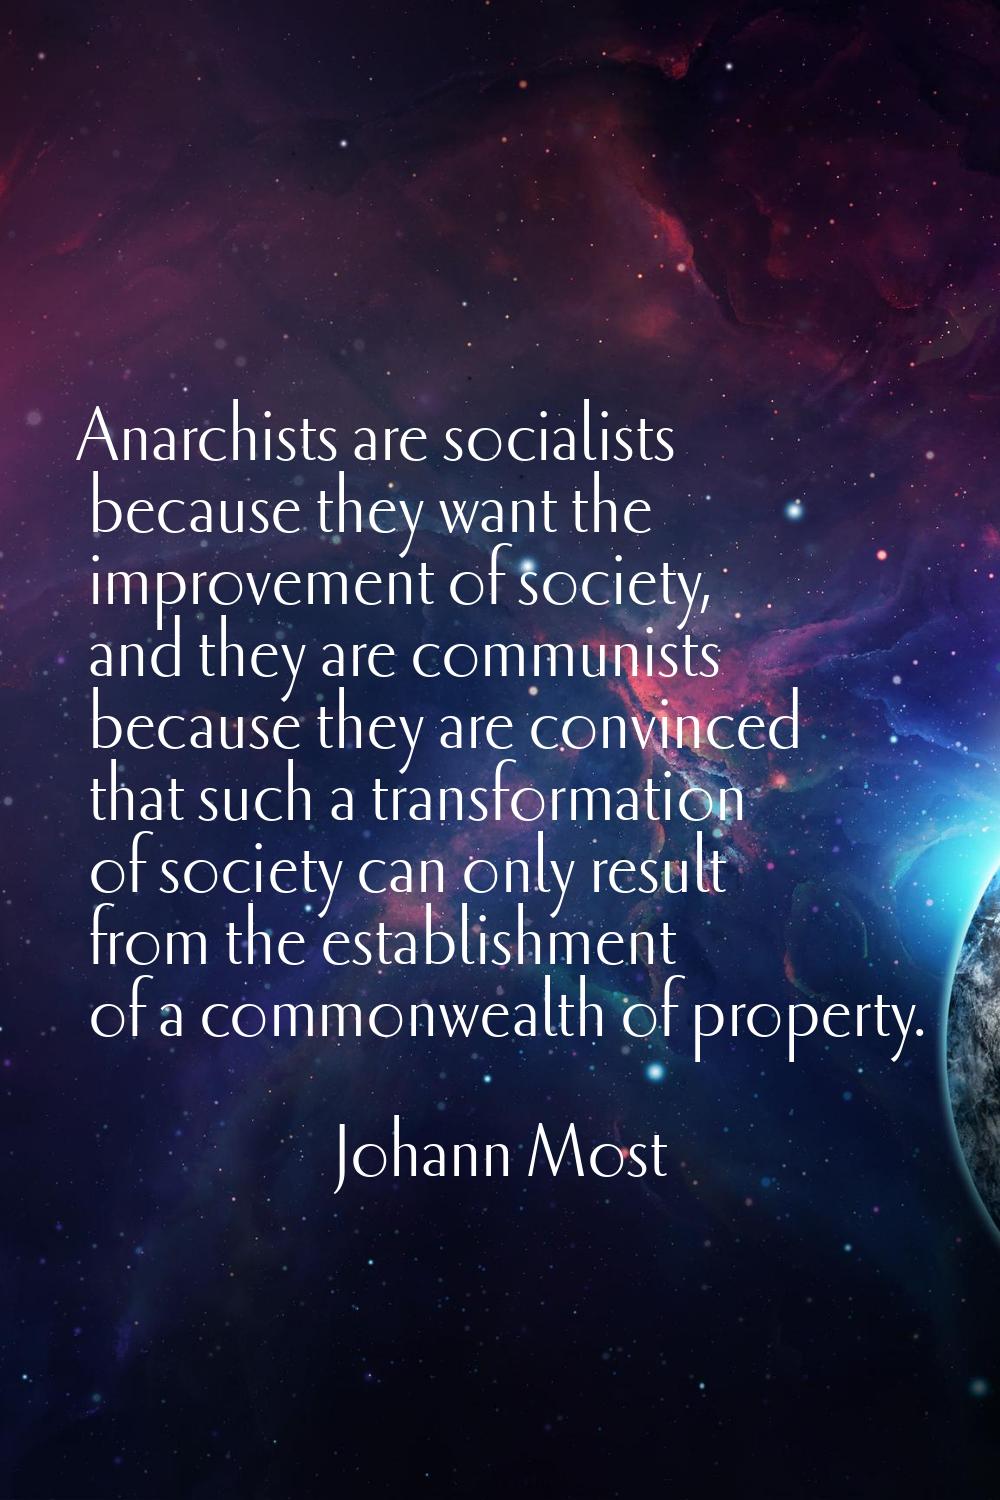 Anarchists are socialists because they want the improvement of society, and they are communists bec